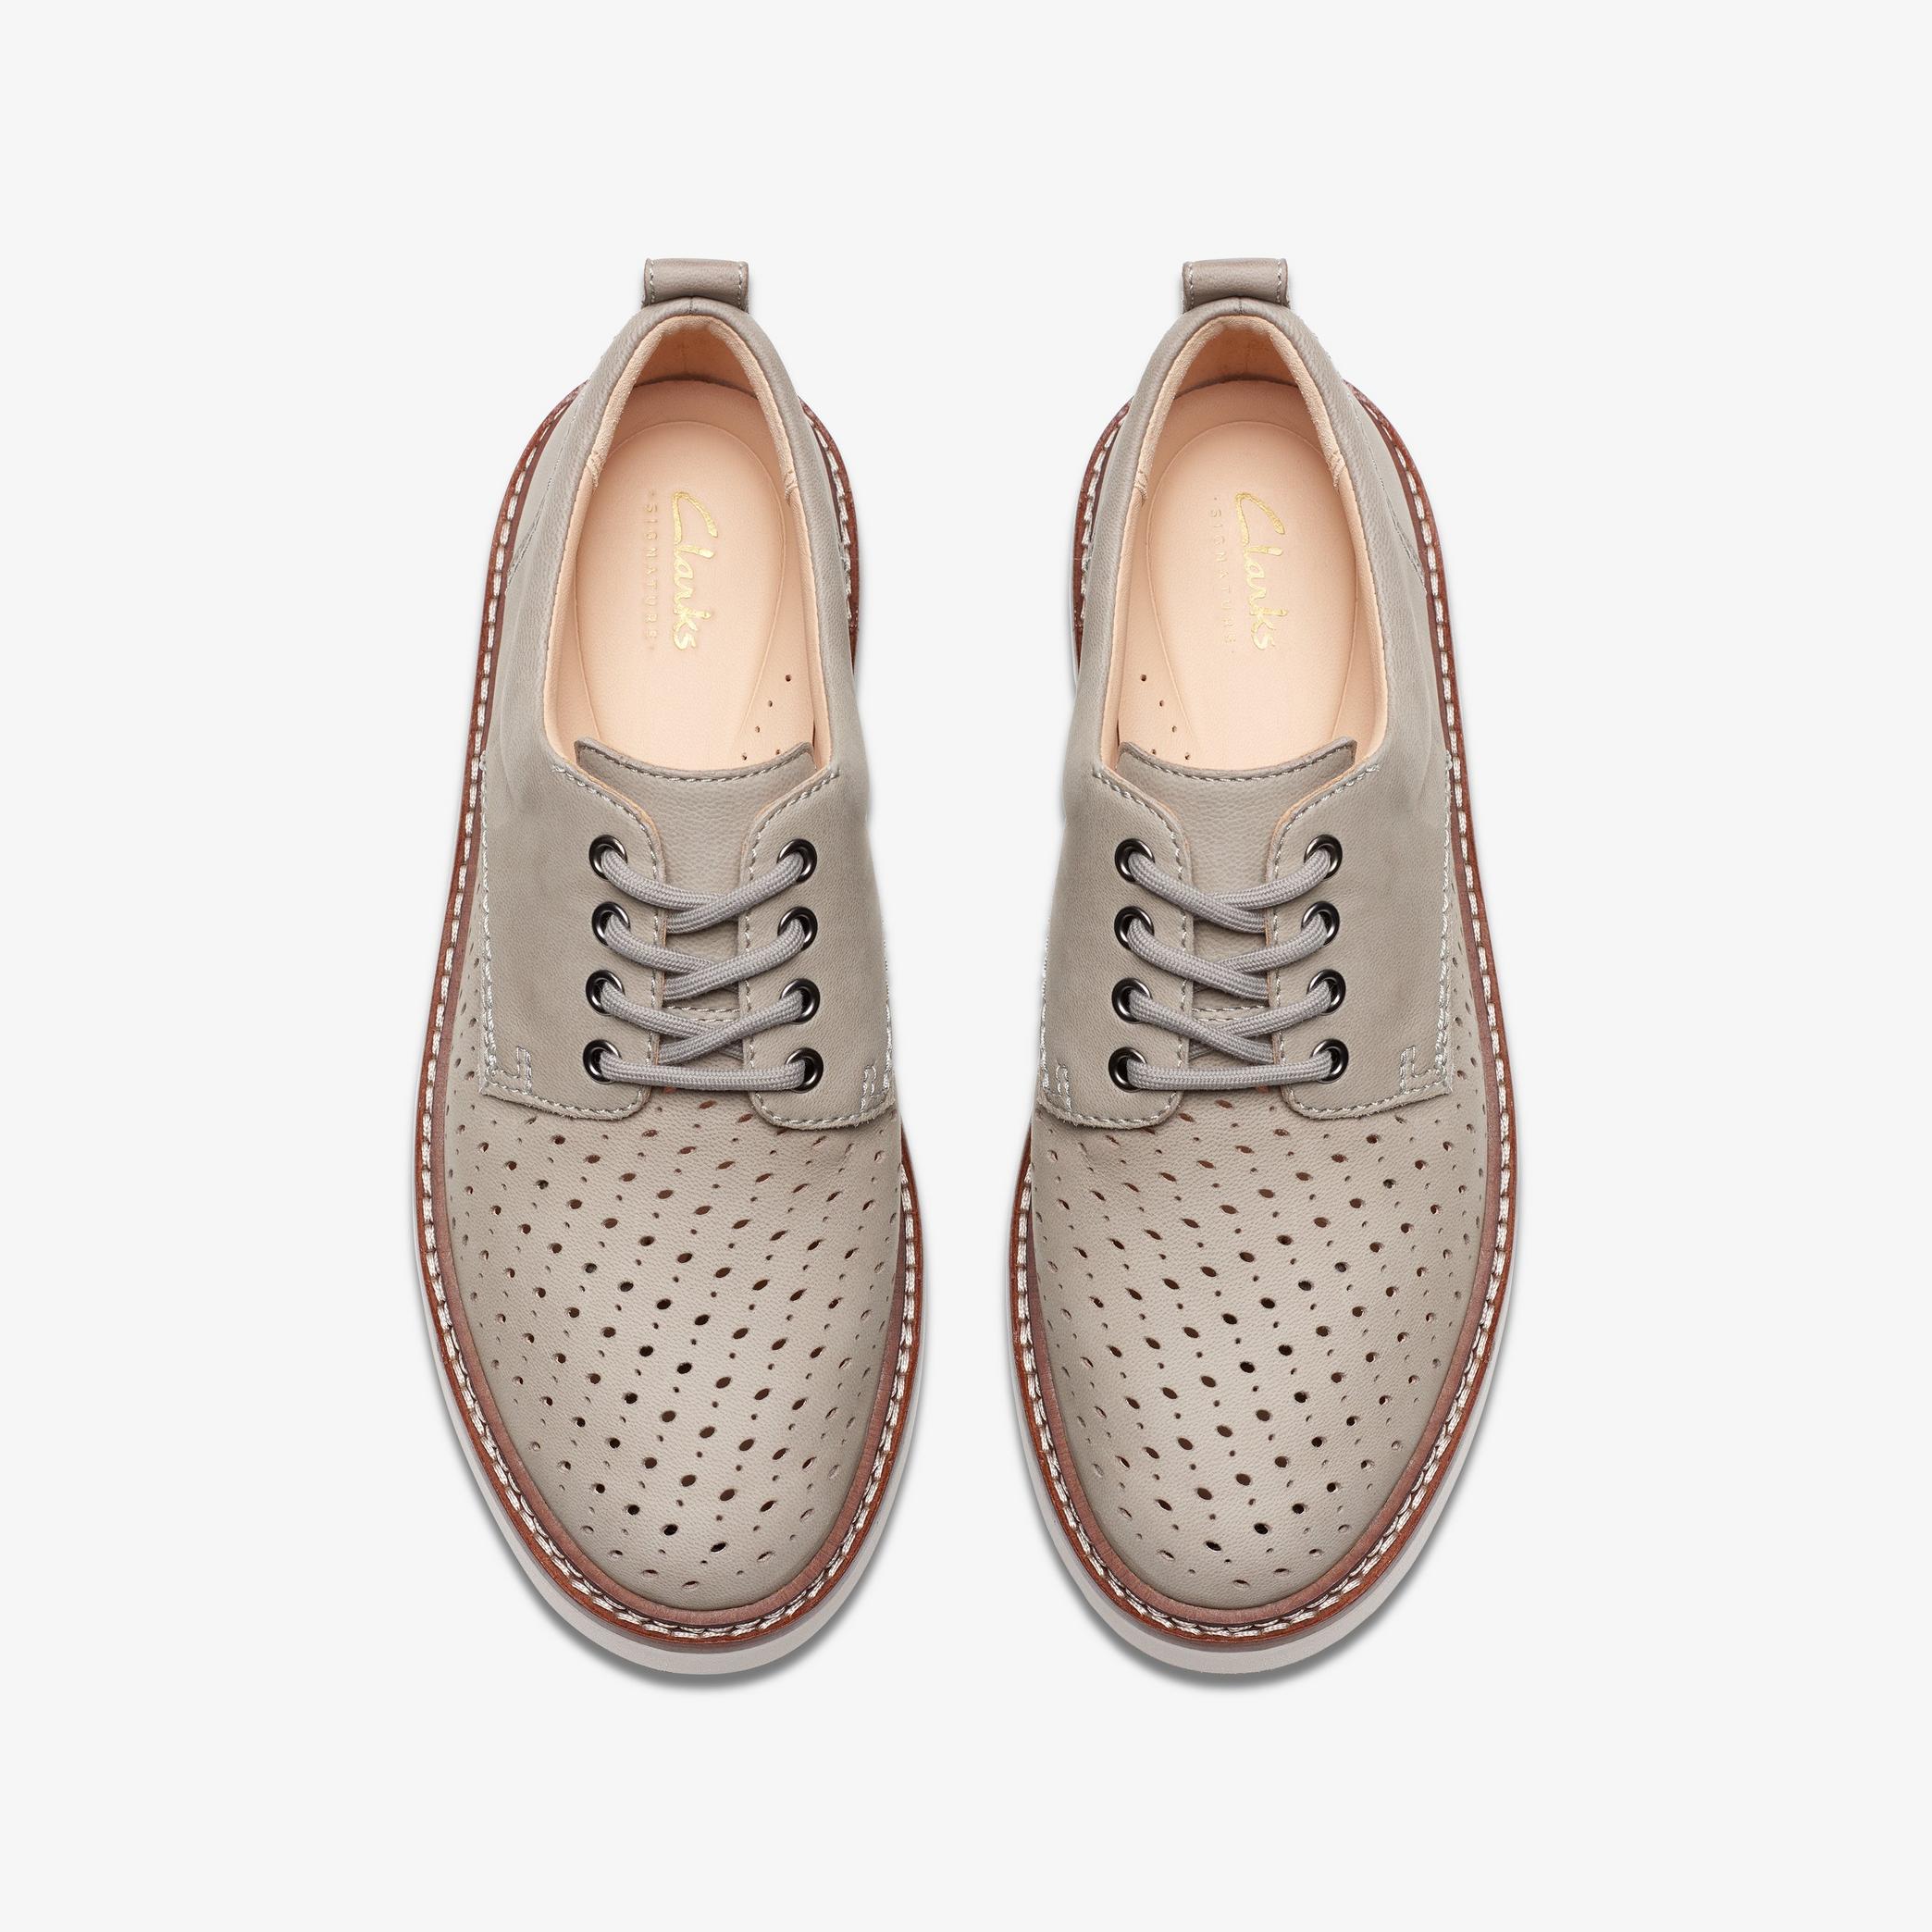 Orianna Move Stone Nubuck Loafers, view 6 of 6